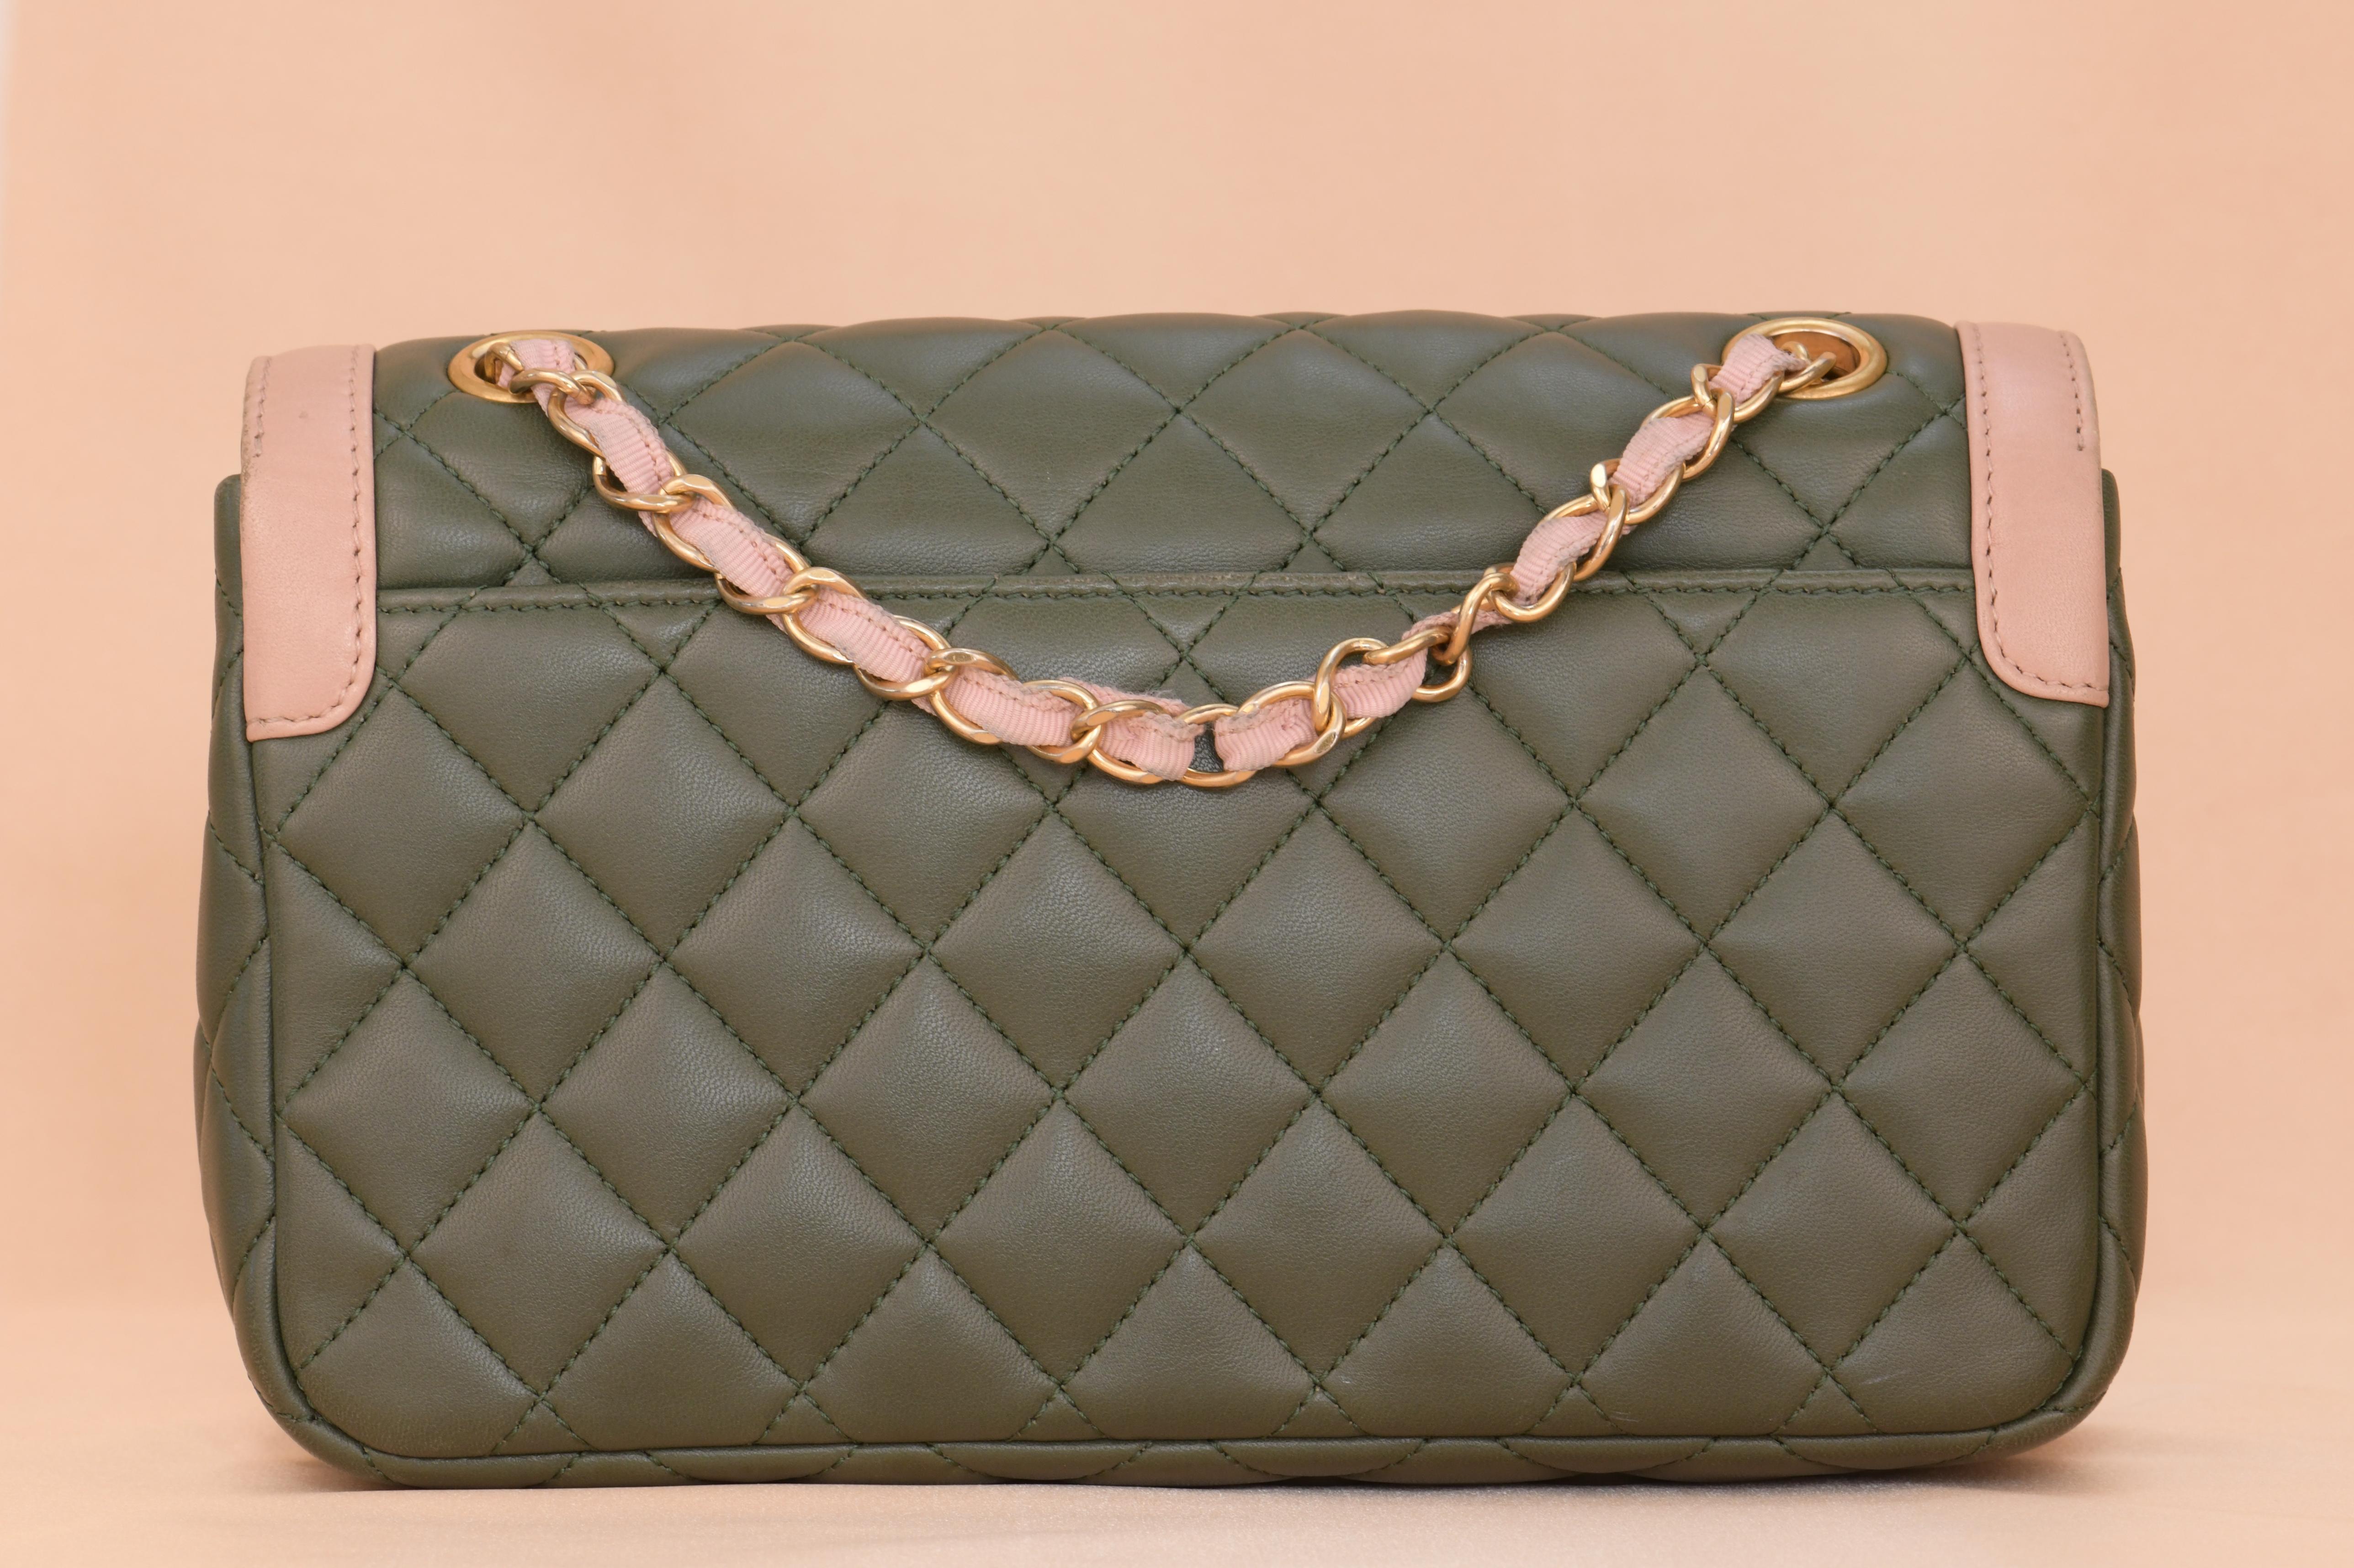 CHANEL Green & Pink Quilted Lambskin Single Flap Bag In Excellent Condition For Sale In Banbury, GB